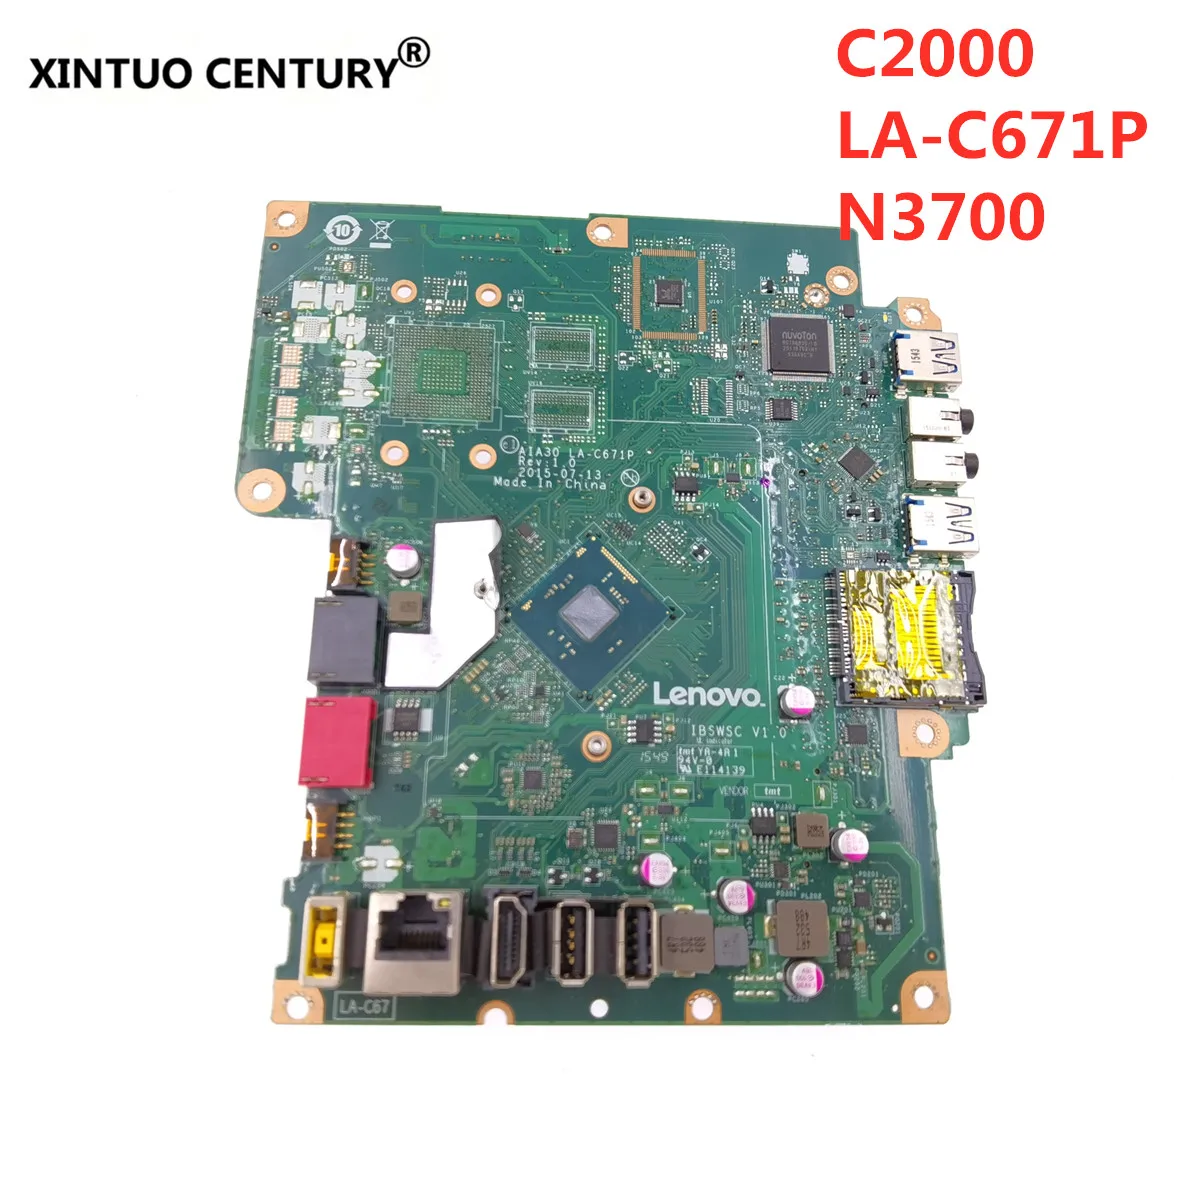 

LA-C671P For Lenovo S200Z C20-00 C2000 AIO Motherboard N3700 CPU AIA30 FRU 00XG052 IBSWSC V1.0 100% Tested Fast Ship